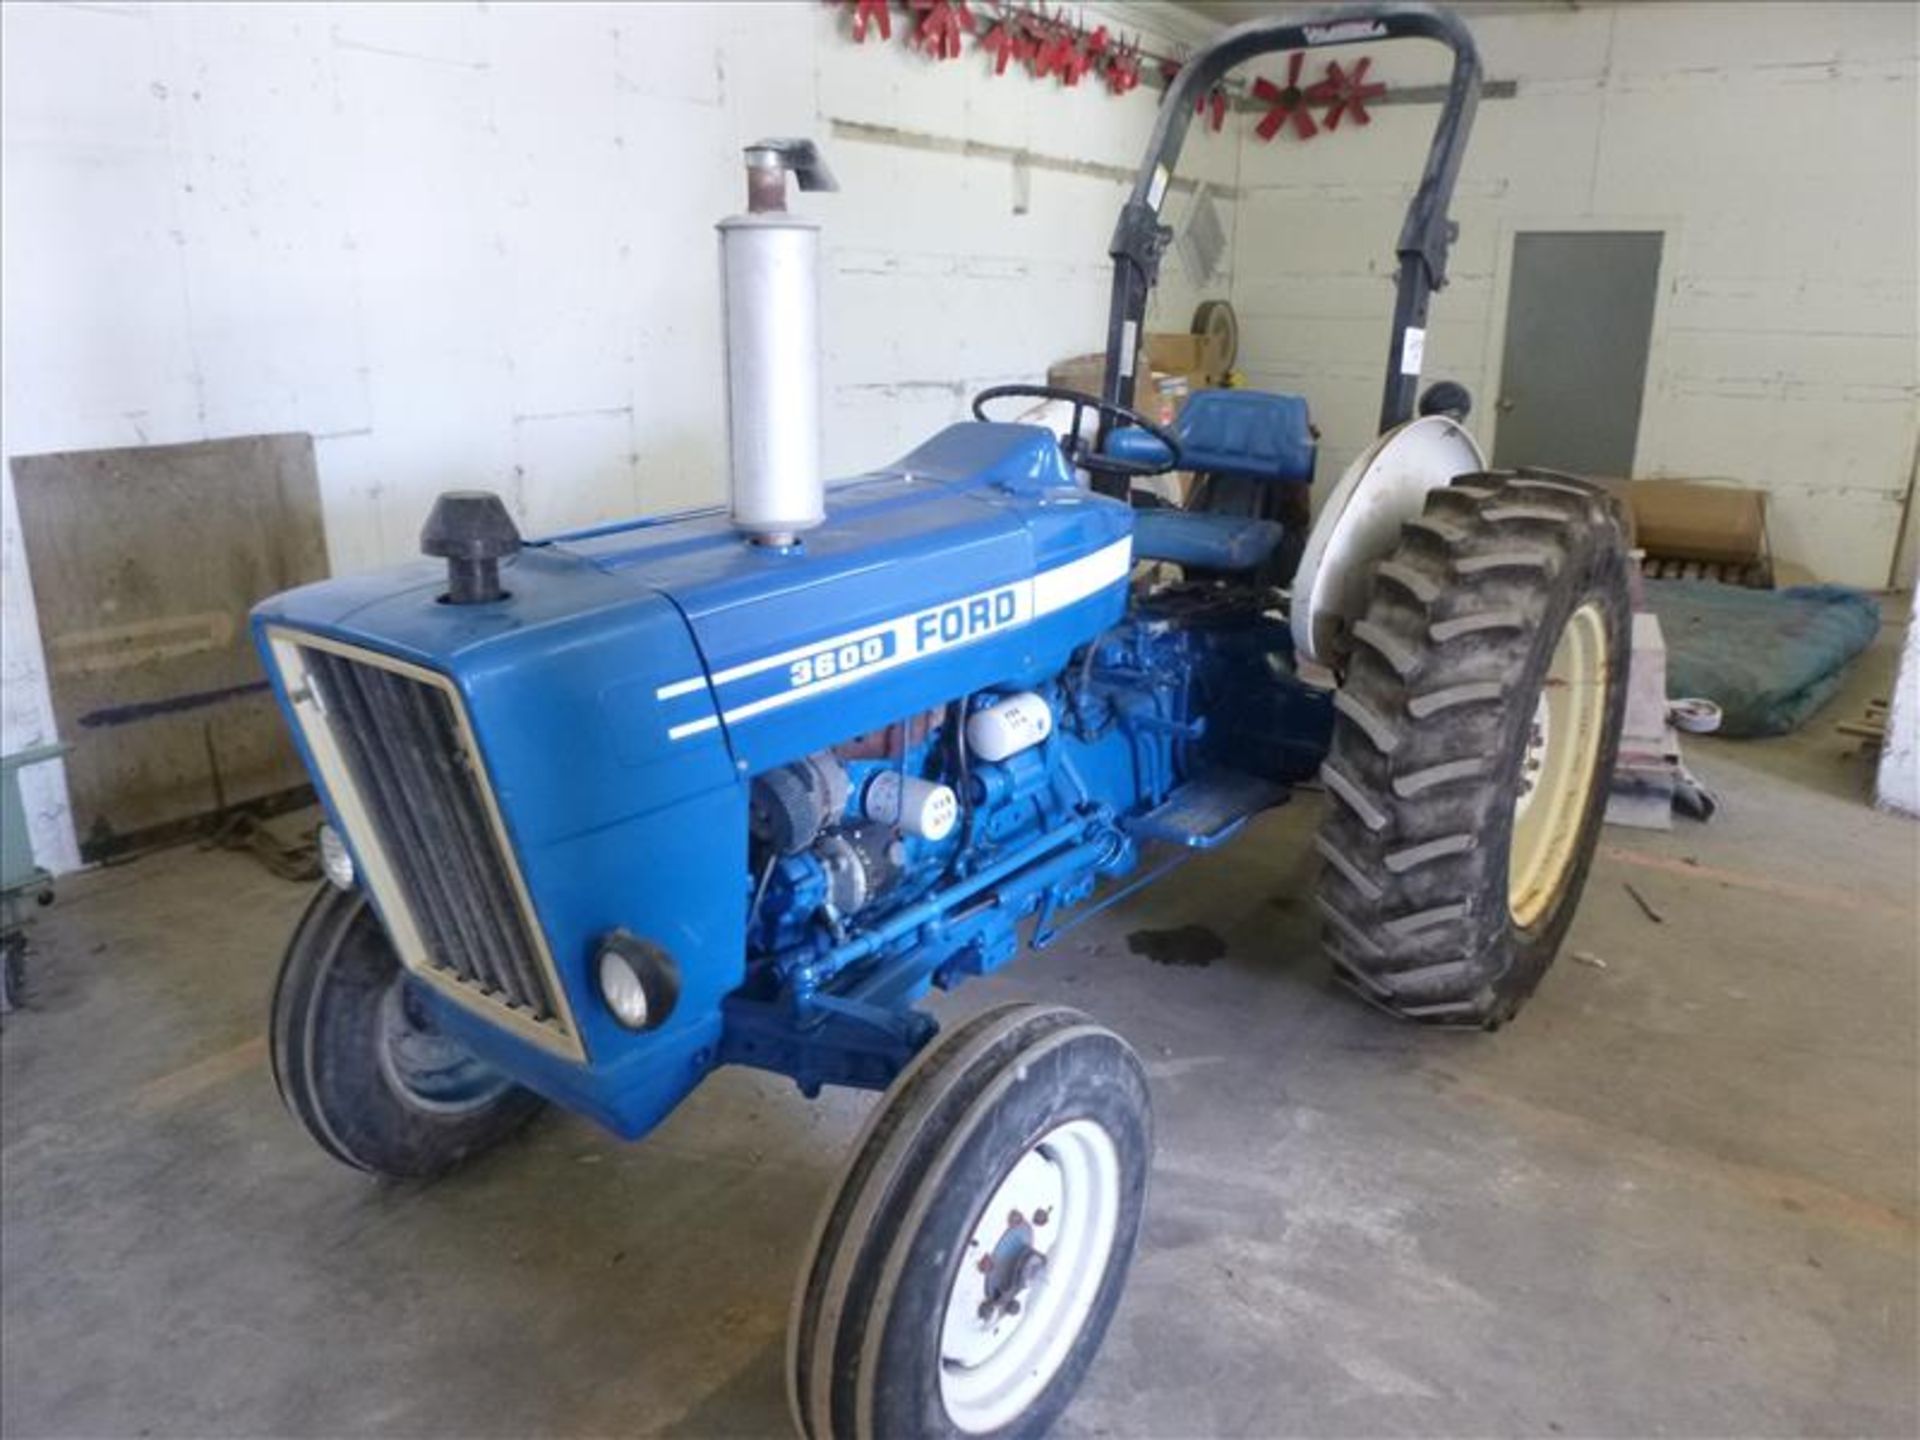 Ford tractor, model 3600 (Rolling Stock)